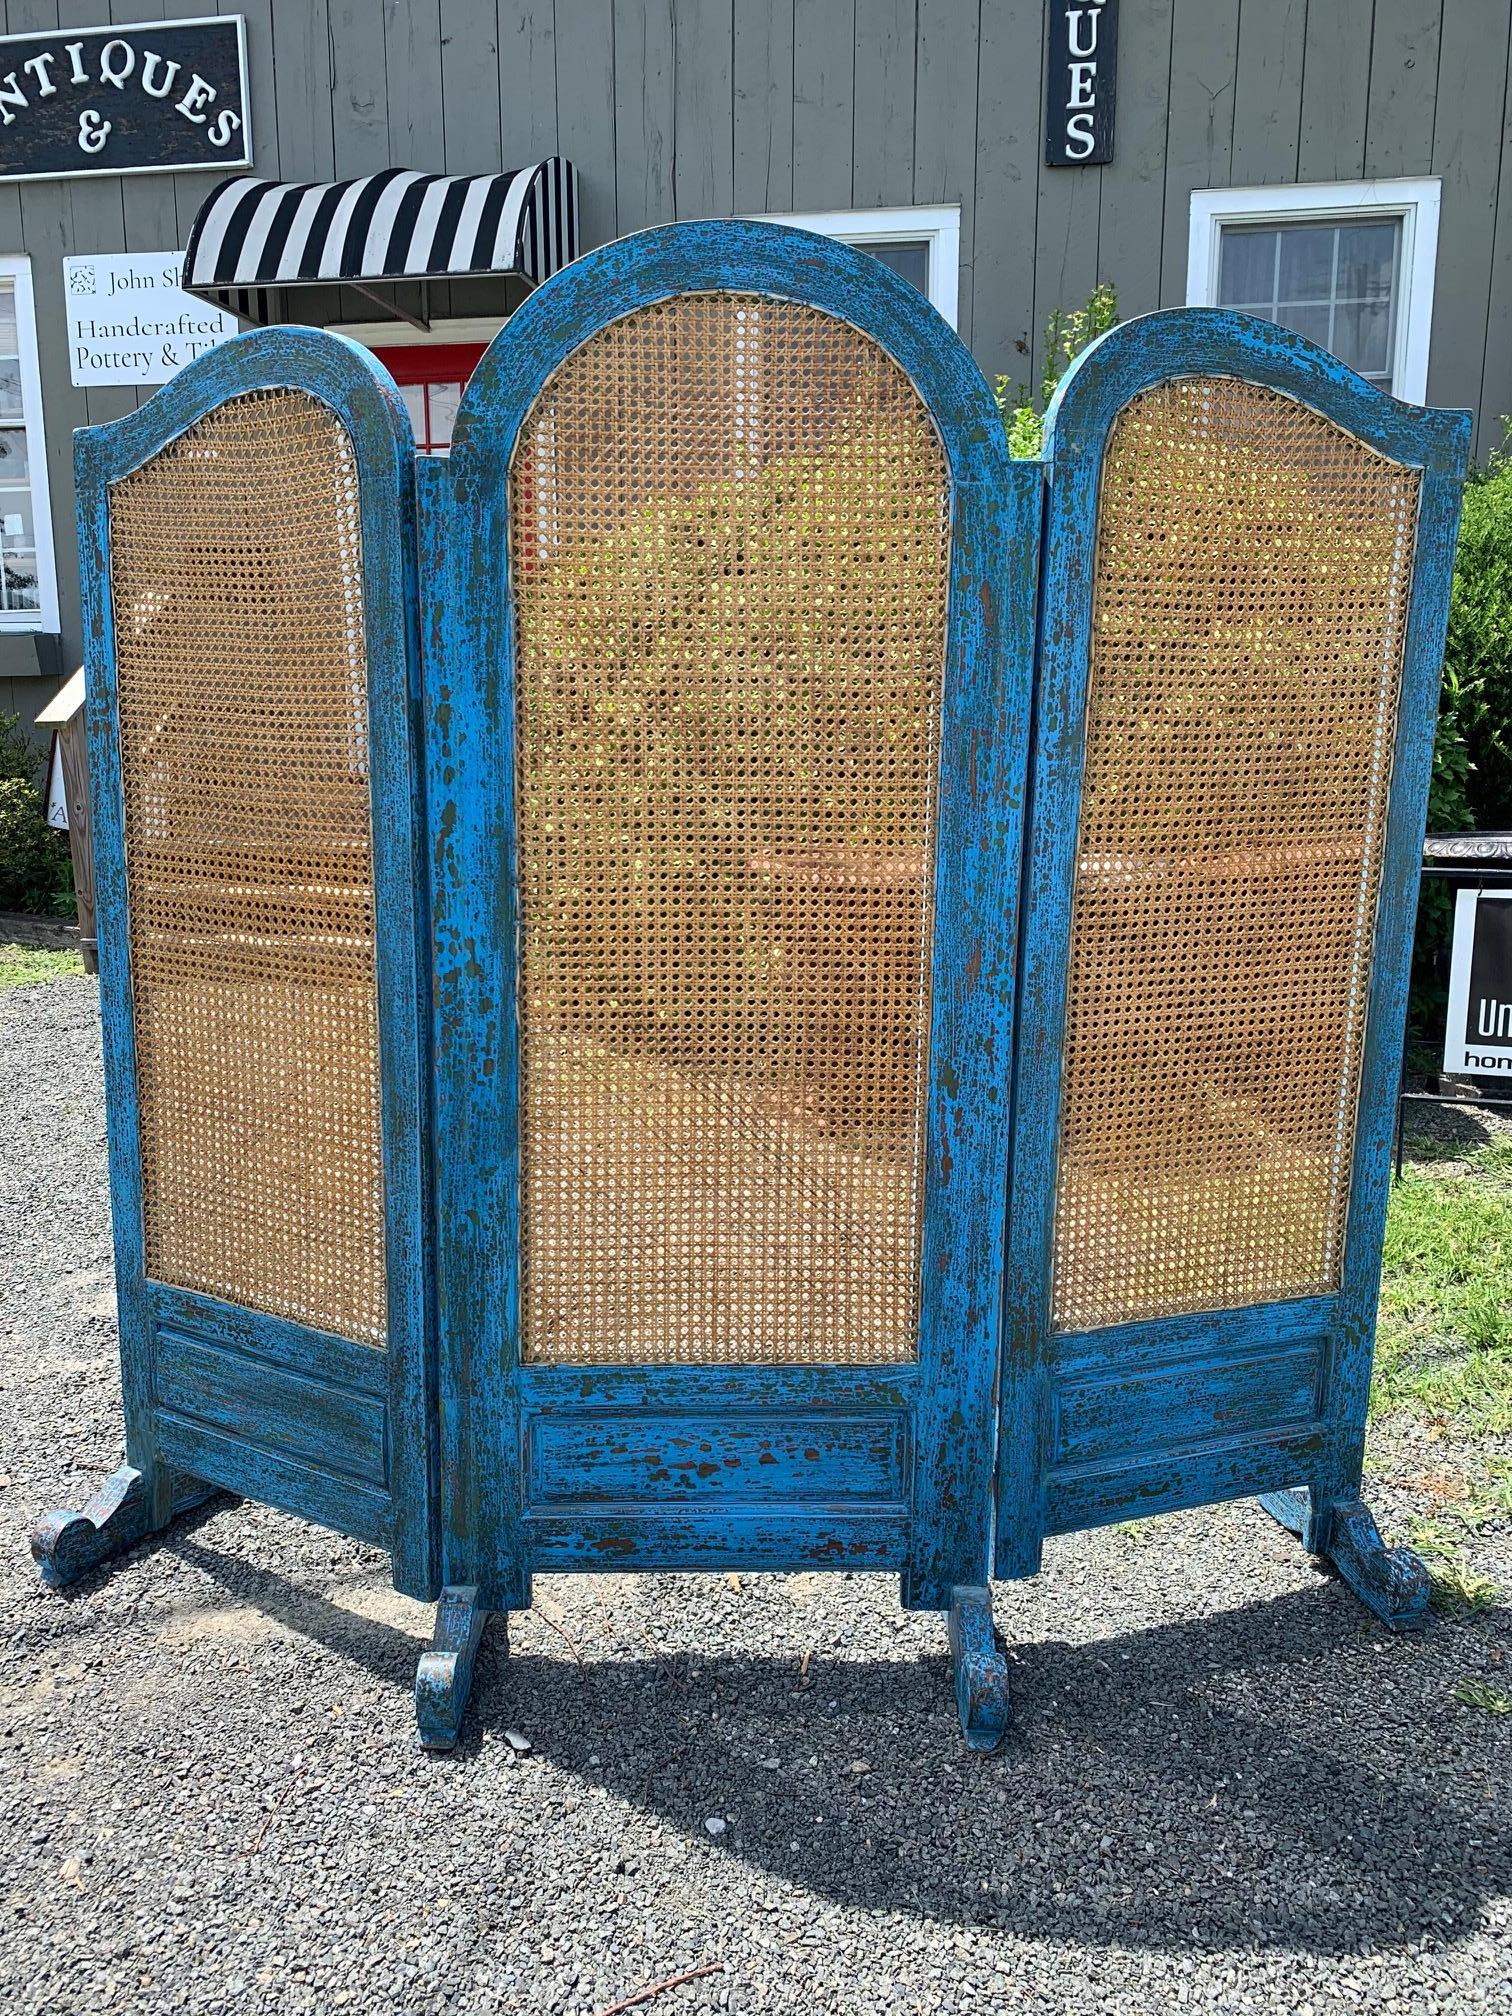 A stunning 3 panel screen having turquoise Caribbean blue painted scrubbed wood frame and feet with natural colored caning on the panels.
71” H middle panel
68” H side panels.
 